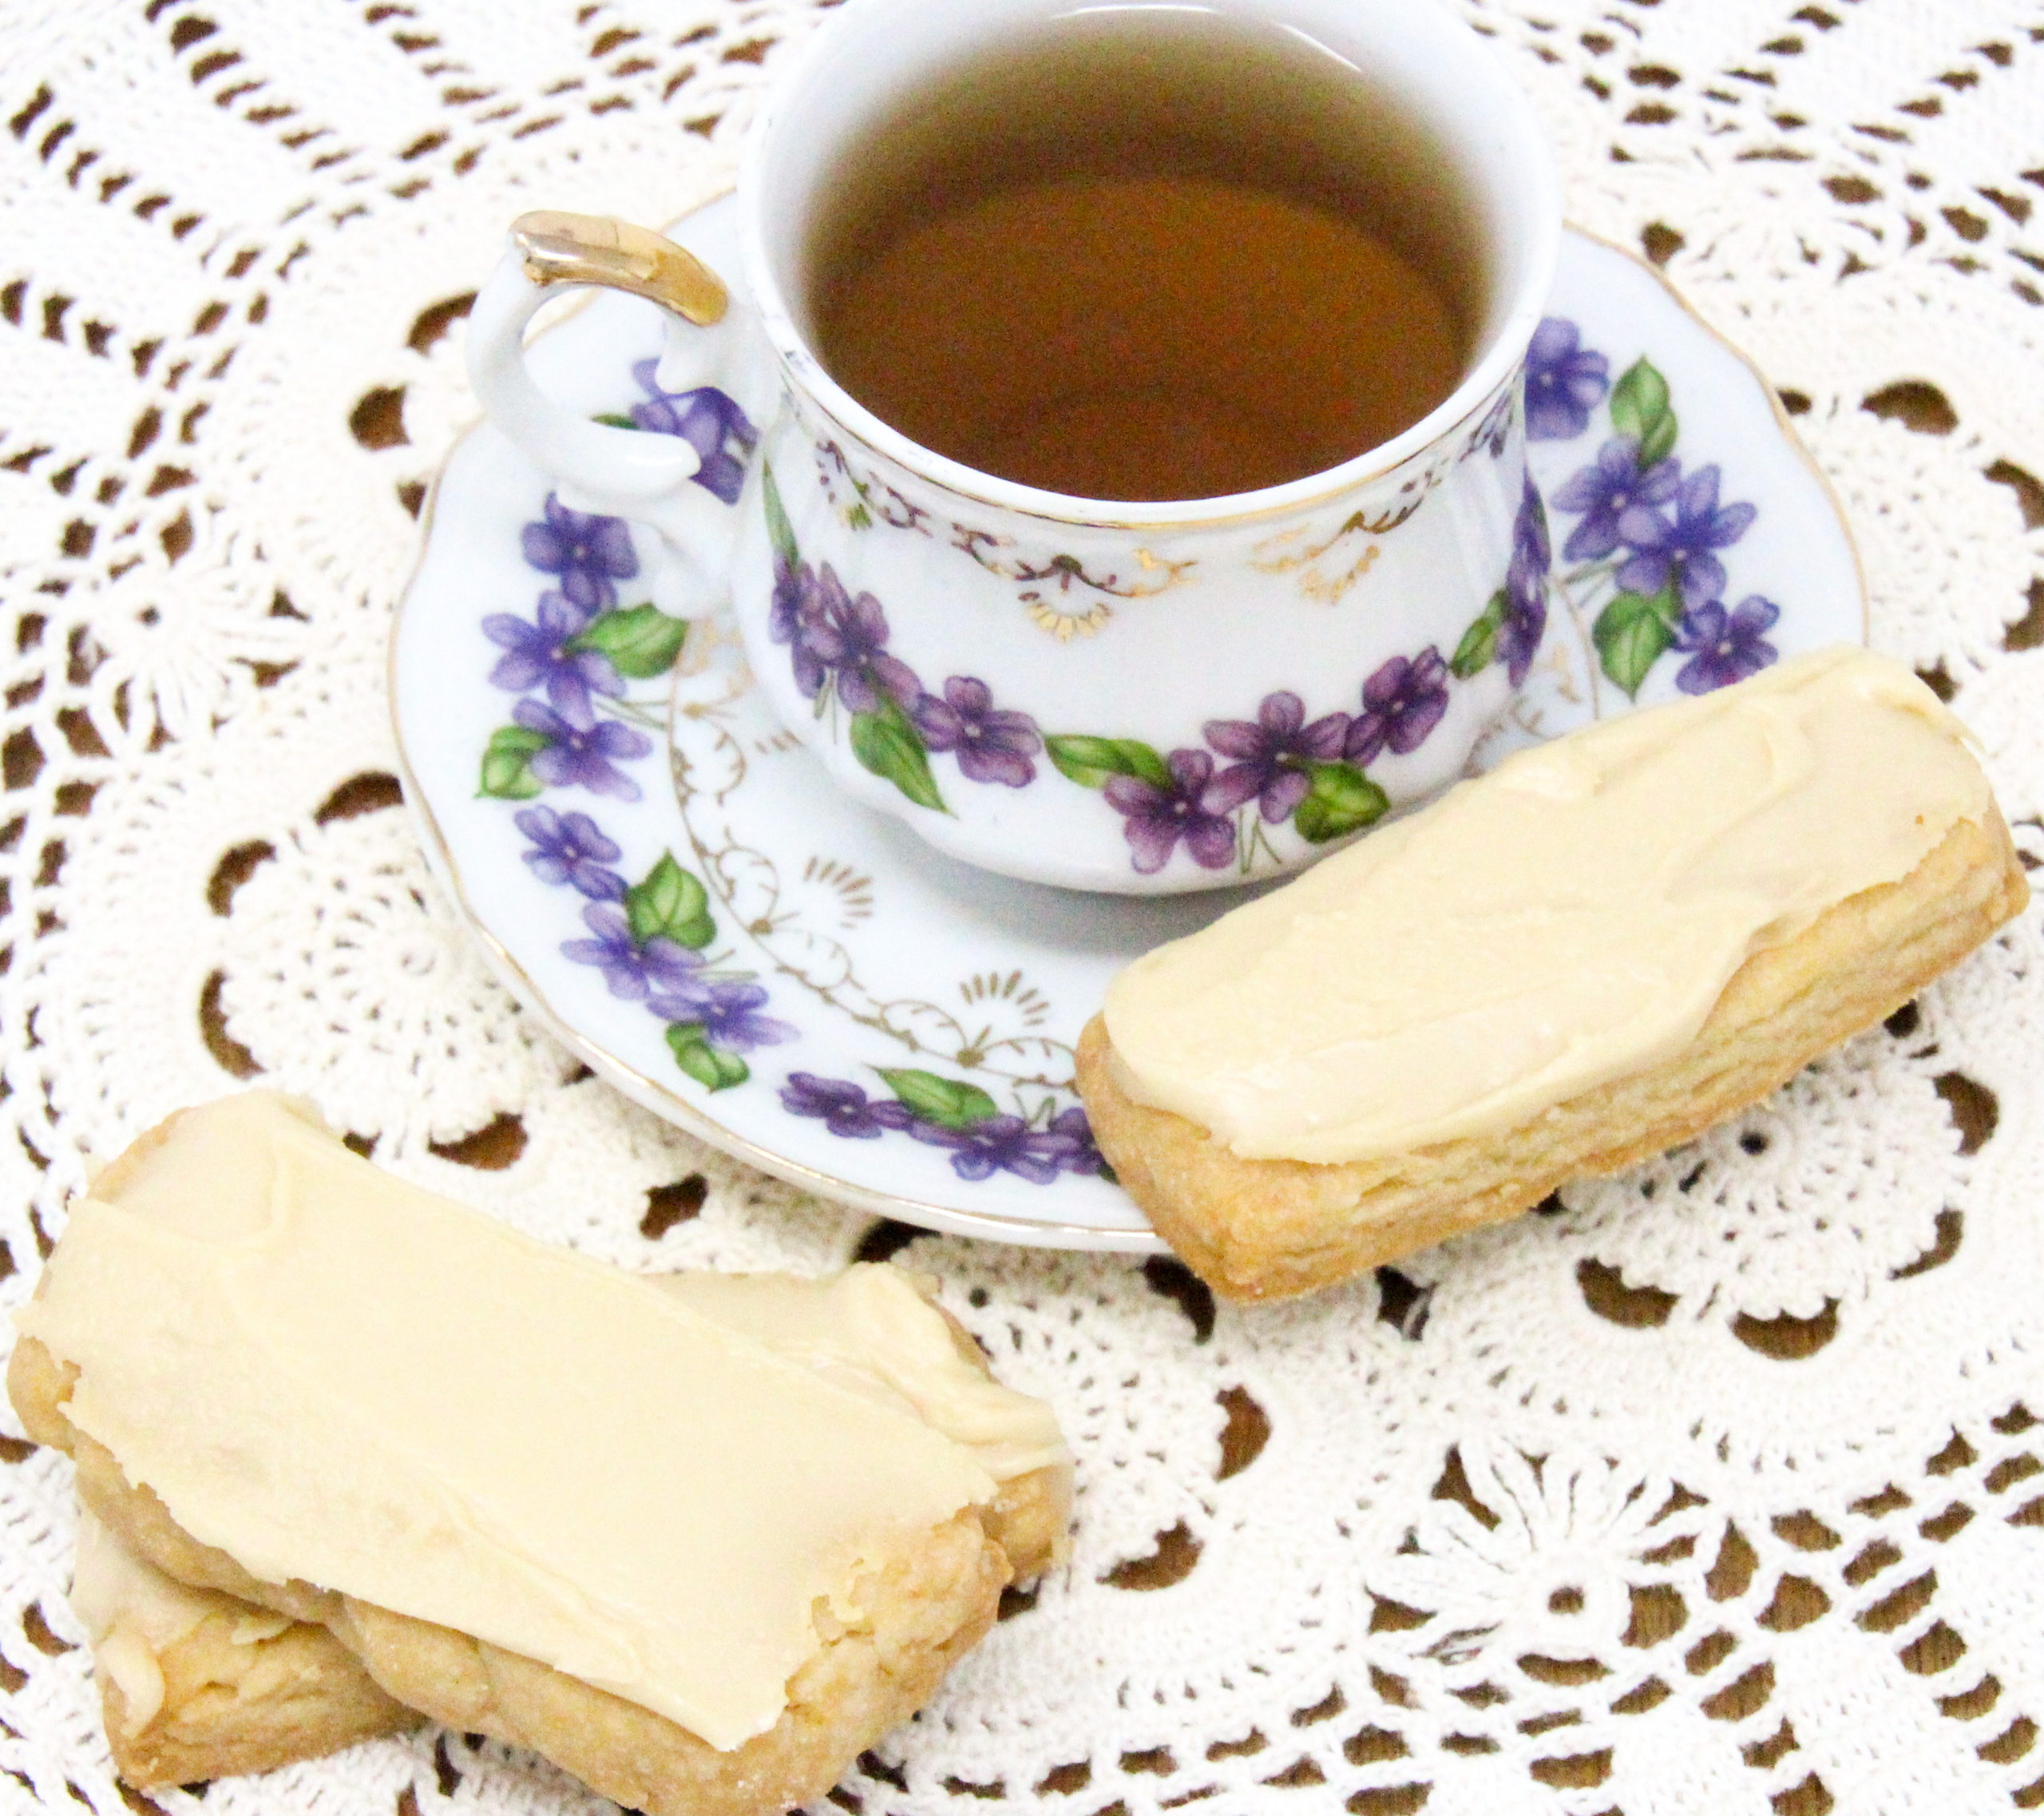 Sweetened with maple sugar and brown sugar, Maple Shortbread Cookies are flaky and tender, and evoke the flavor of autumn. Recipe created by Cinnamon & Sugar for Catherine Bruns, author of A DOOMFUL OF MURDER. 